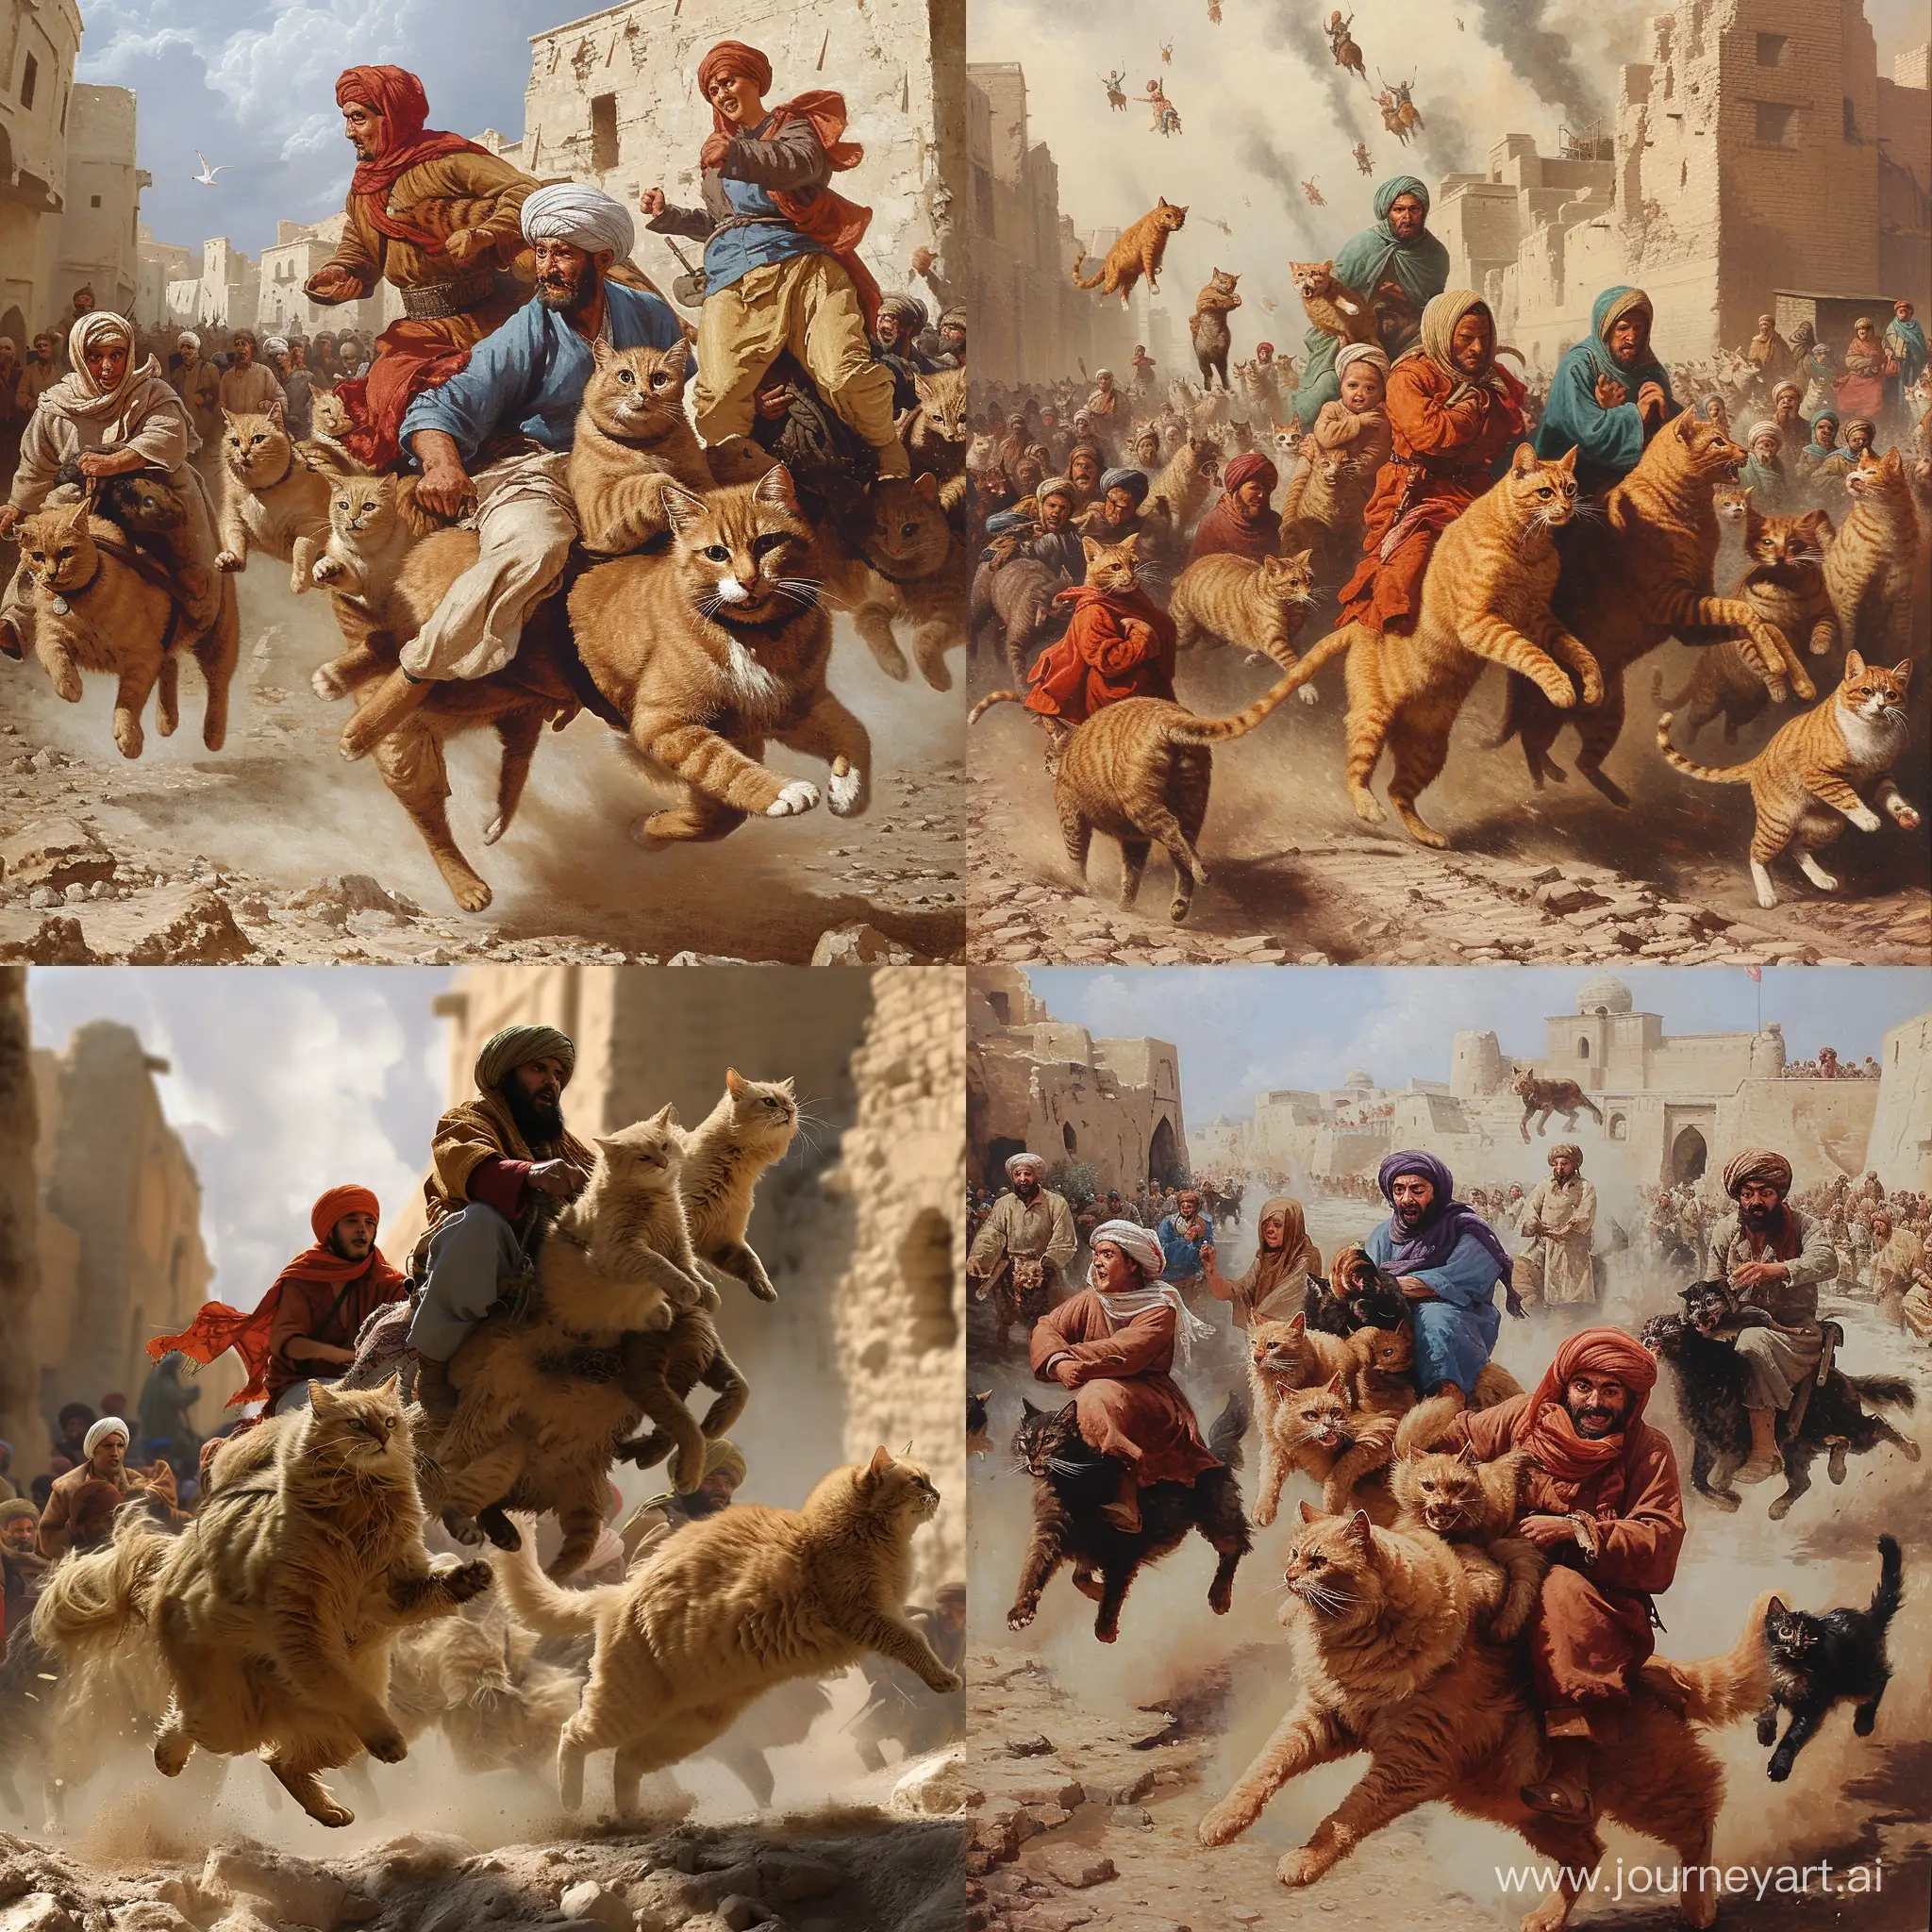 The people of the city of Bam in the Persian Empire are riding Persian cats and are running away from the invading soldiers